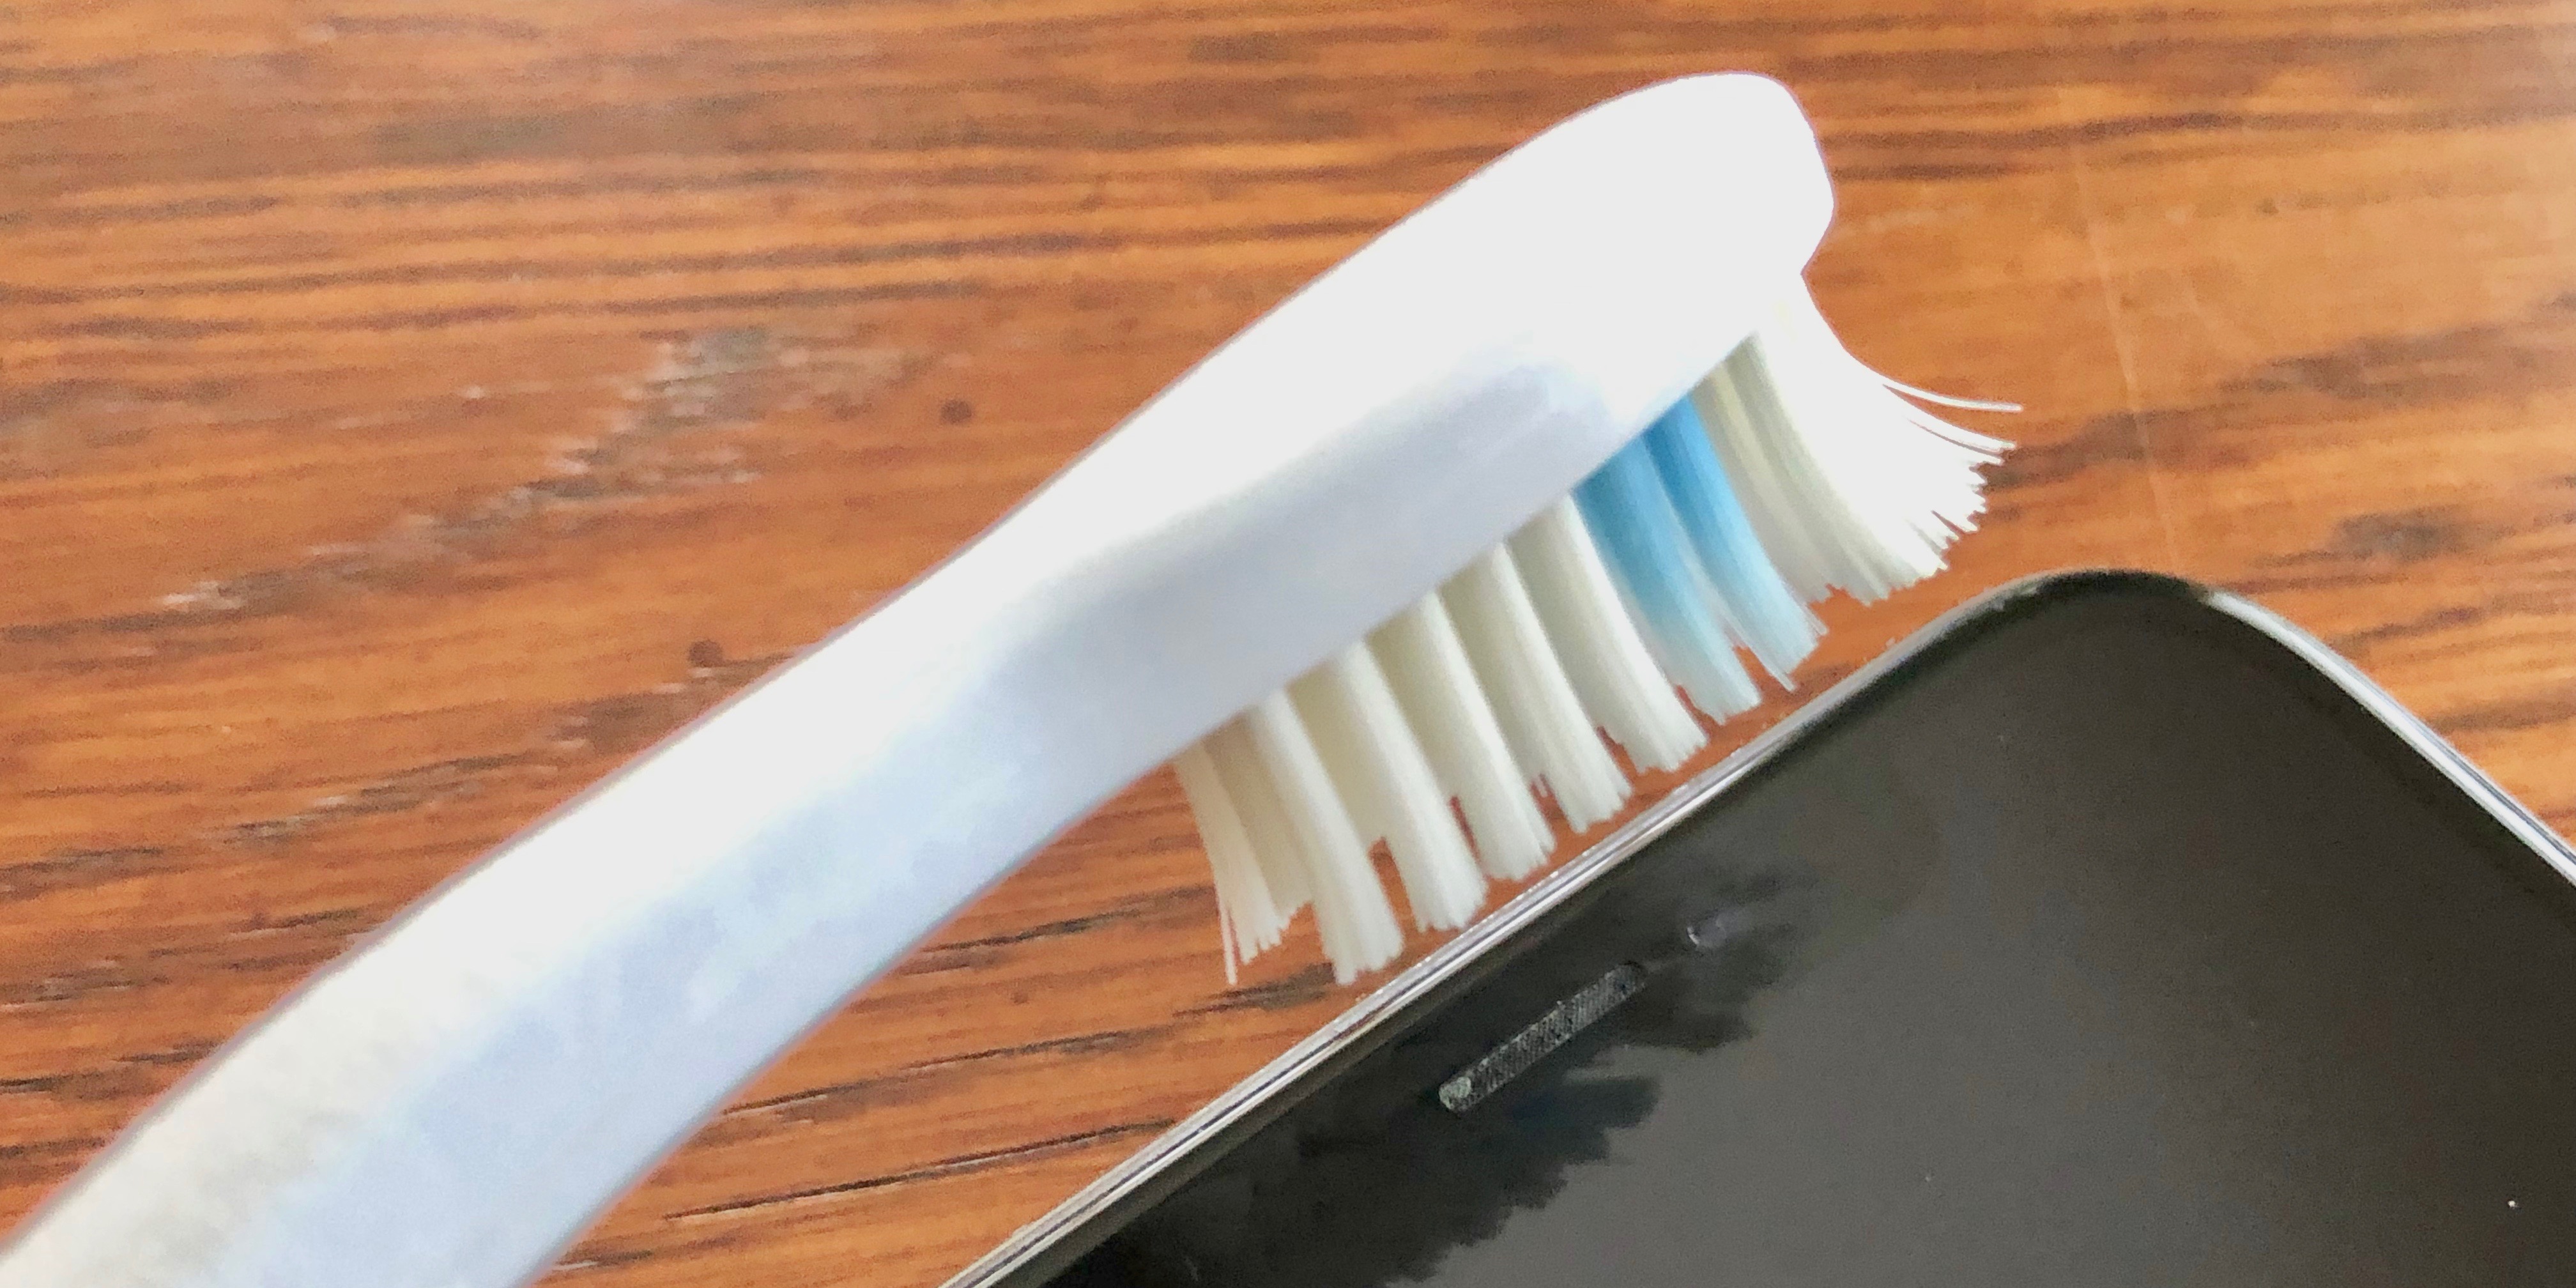 How to clean your iPhone earpiece speaker - 16to16Mac